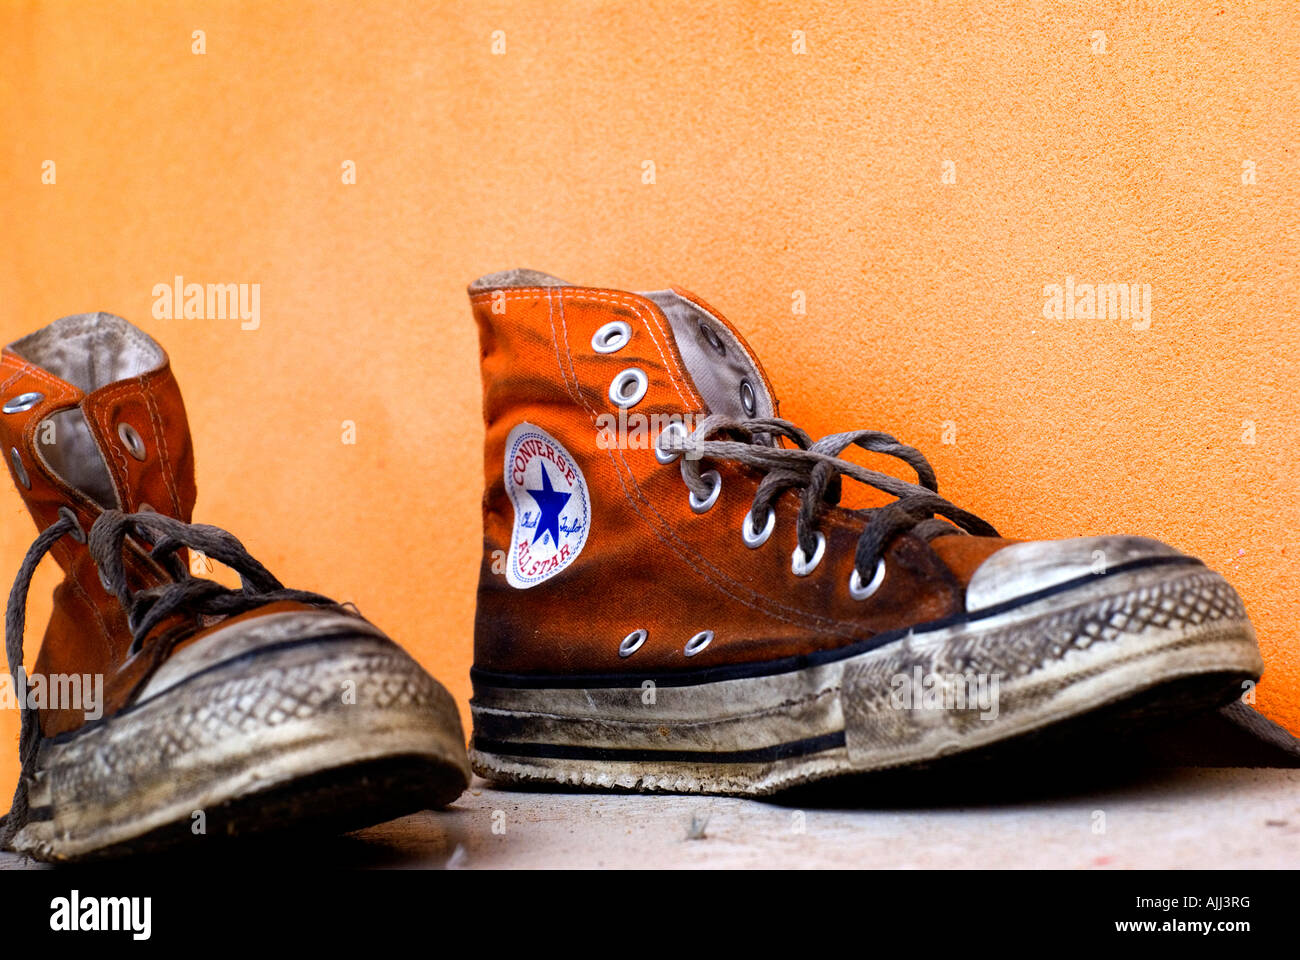 old converse sneakers